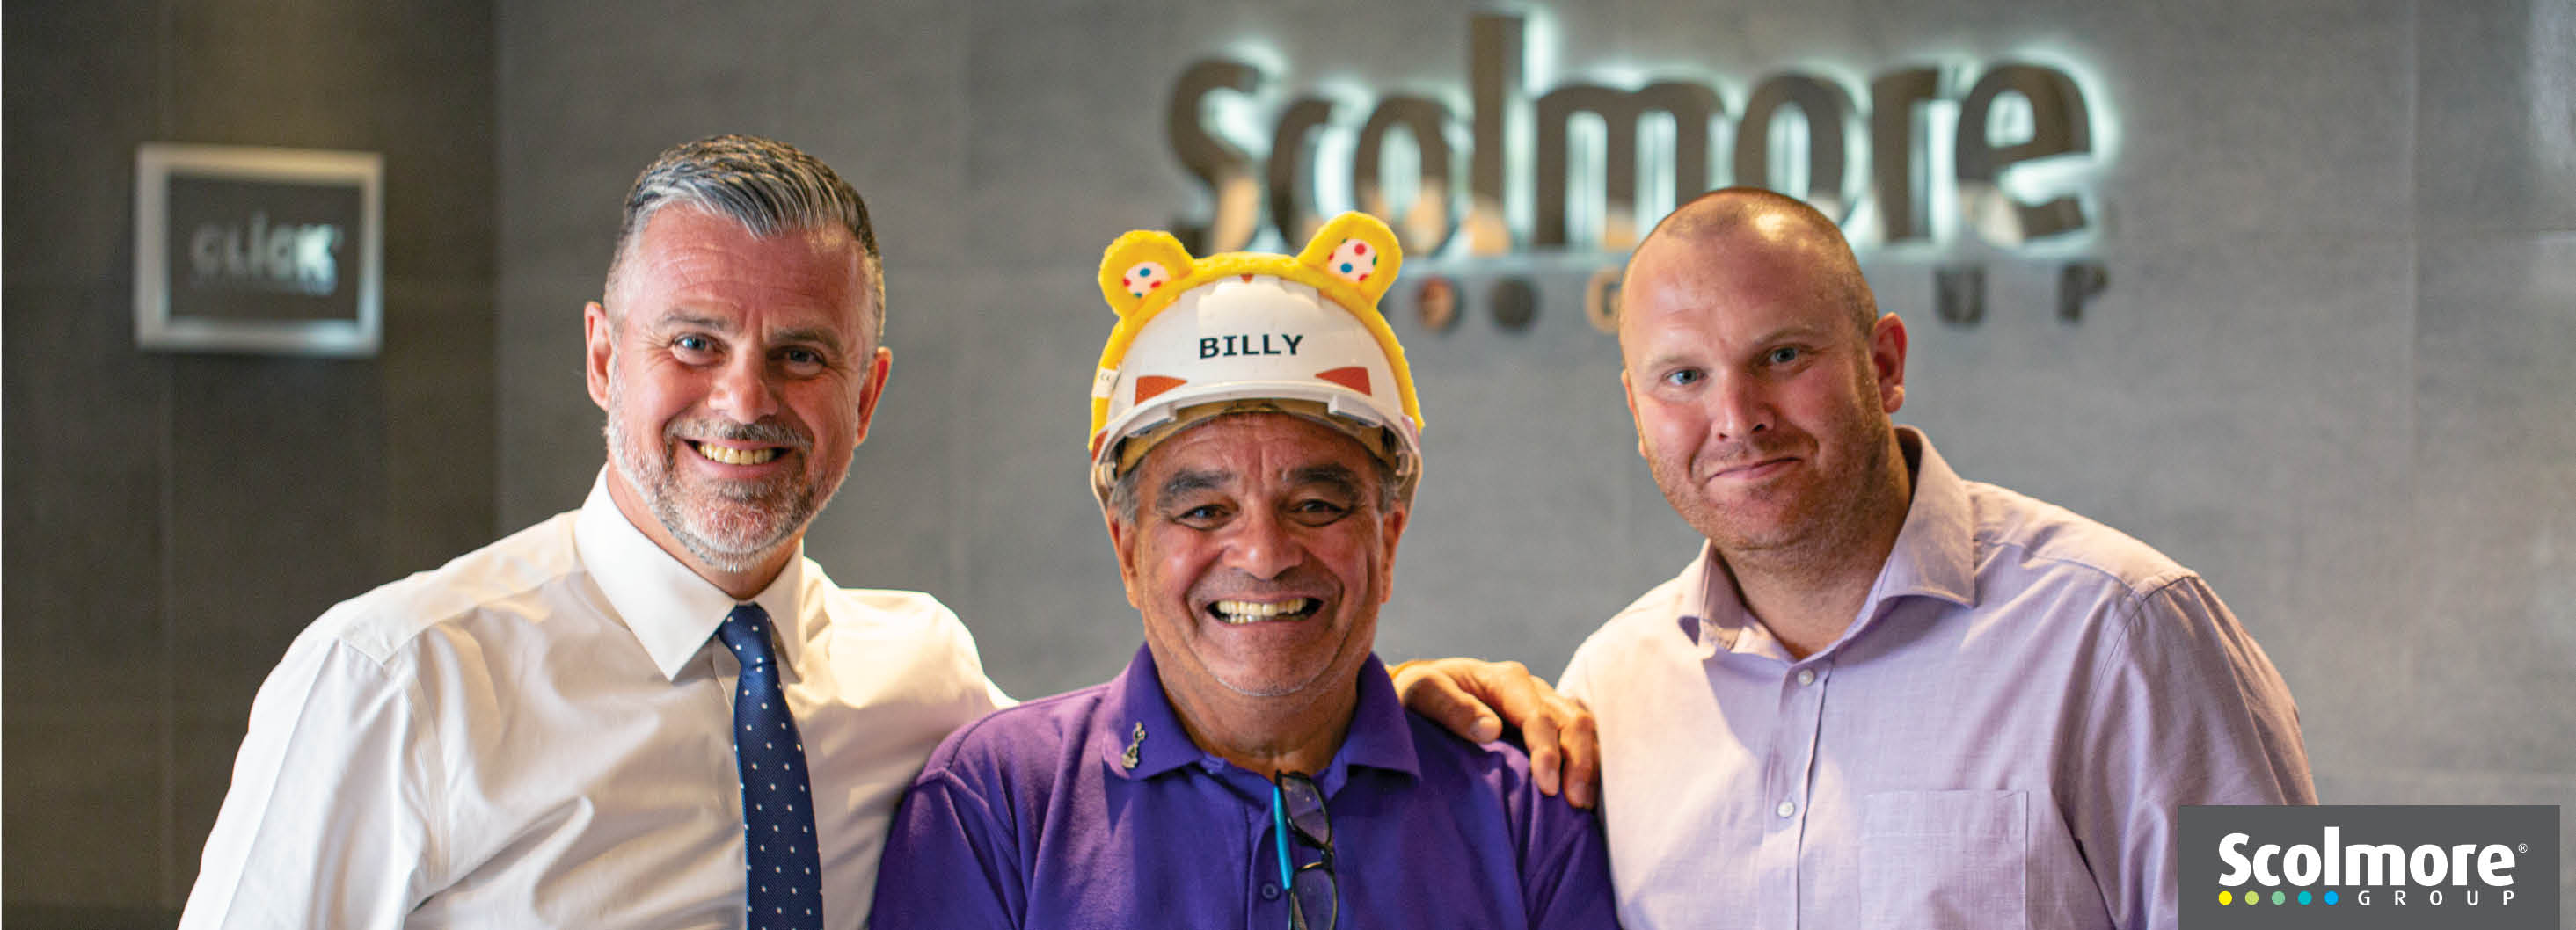 Scolmore gets an SOS from DIY SOS for Children in Need Special